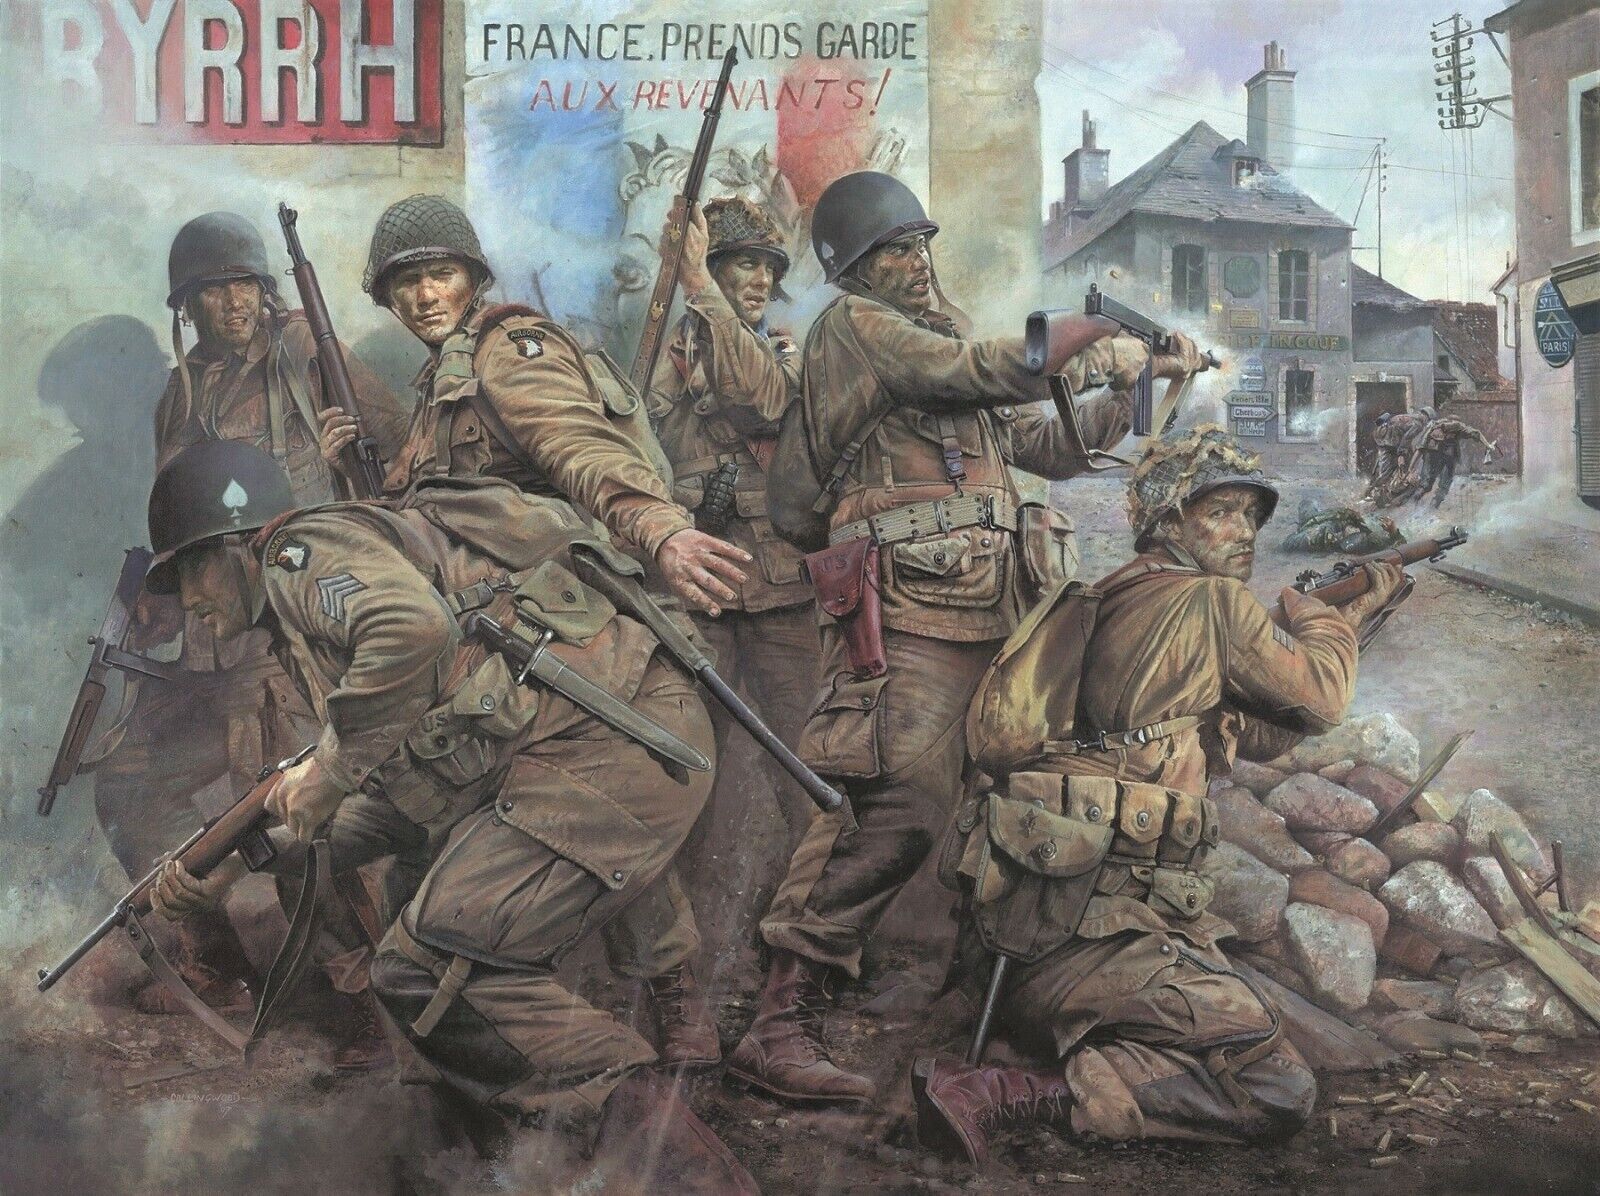 Easy Company - Carentan by Chris Collingwood signed by five Band of Brothers